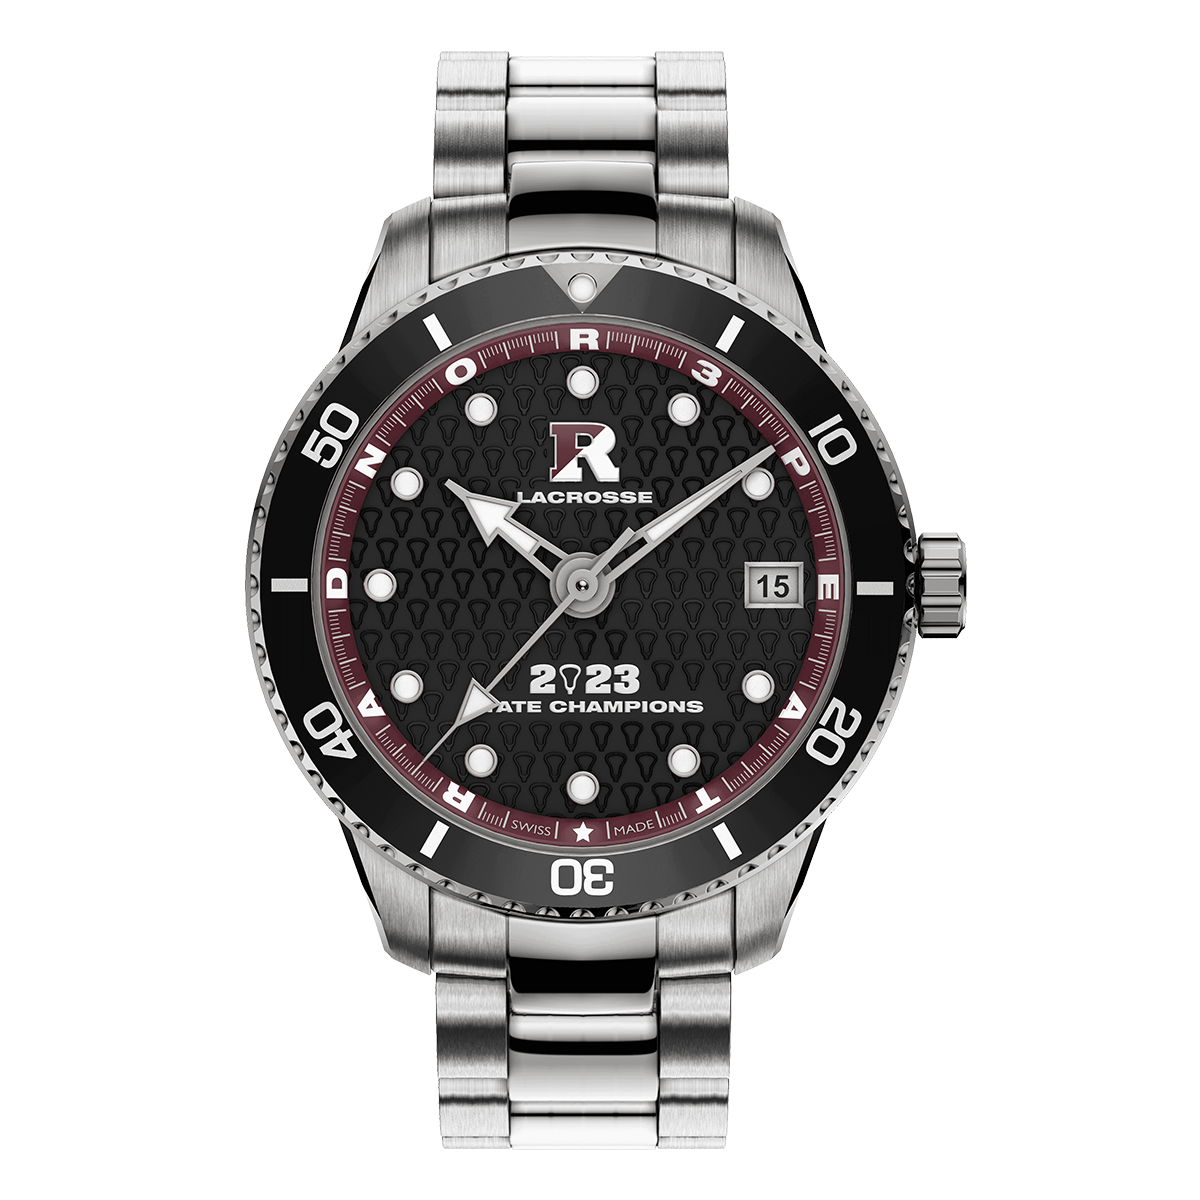 Radnor lacrosse 2023 State Champions Swiss made automatic watch. Front view.